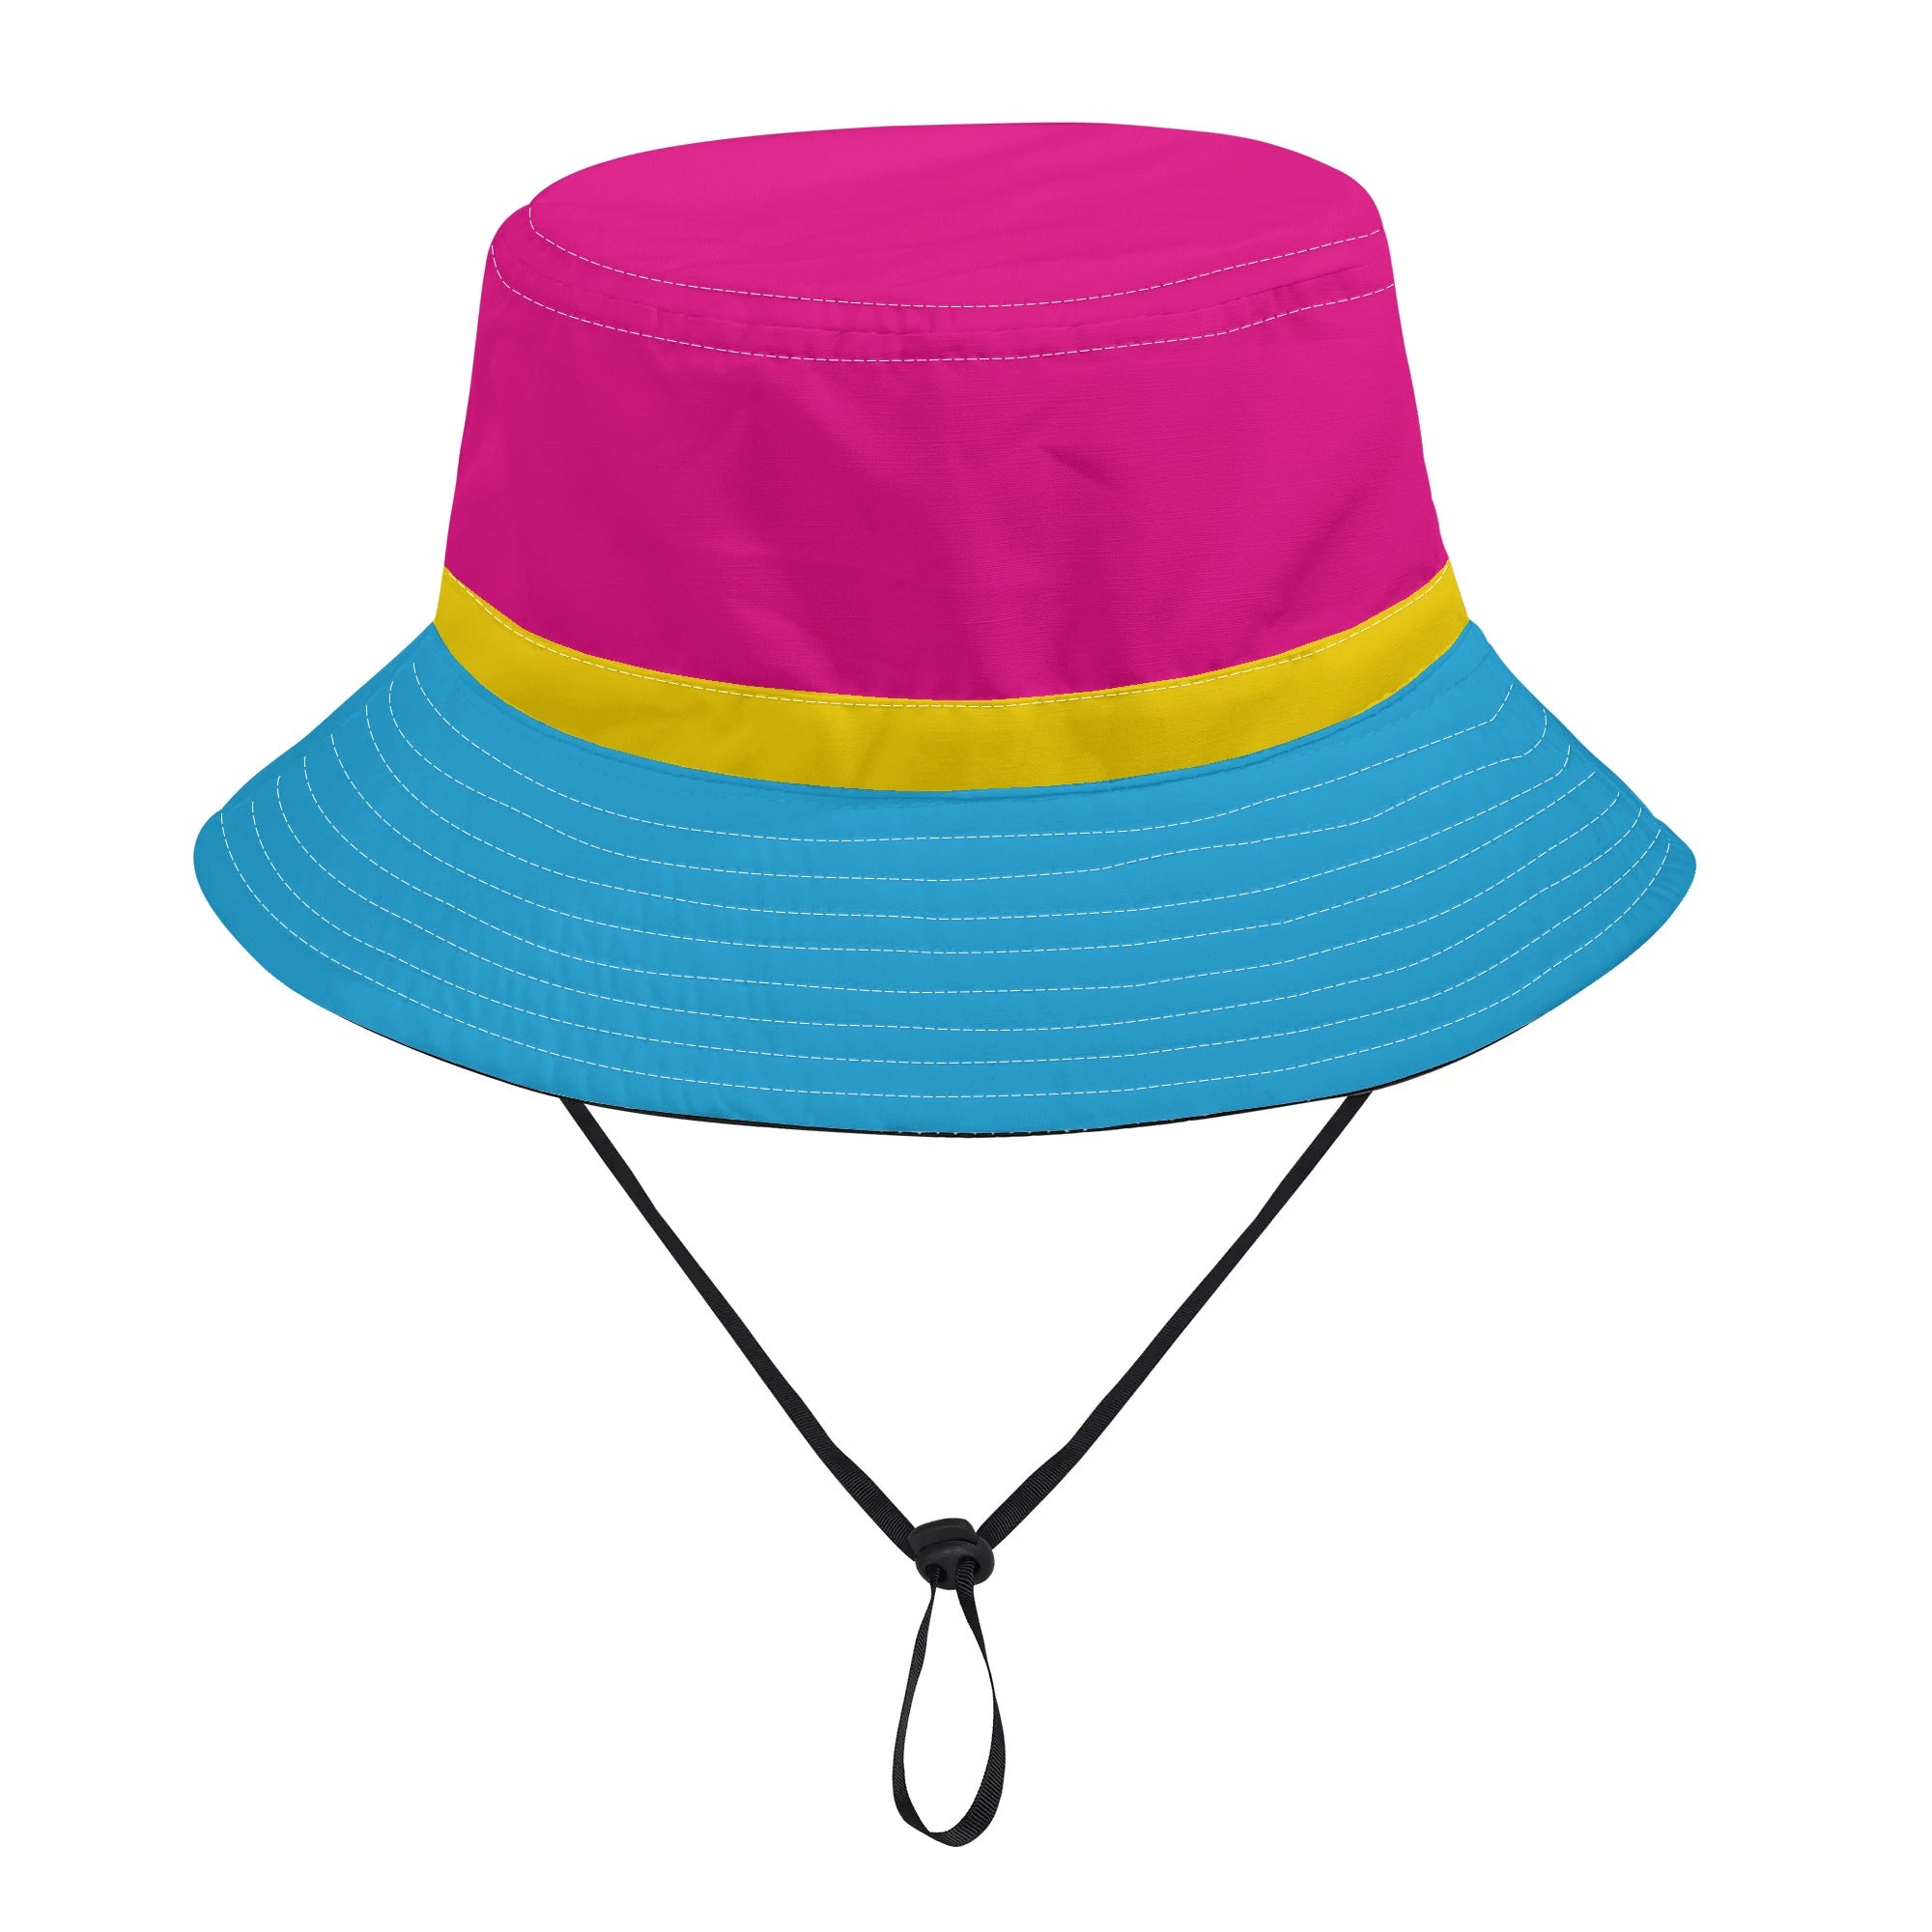 Pansexual pride Flag Bucket Hat with Adjustable String